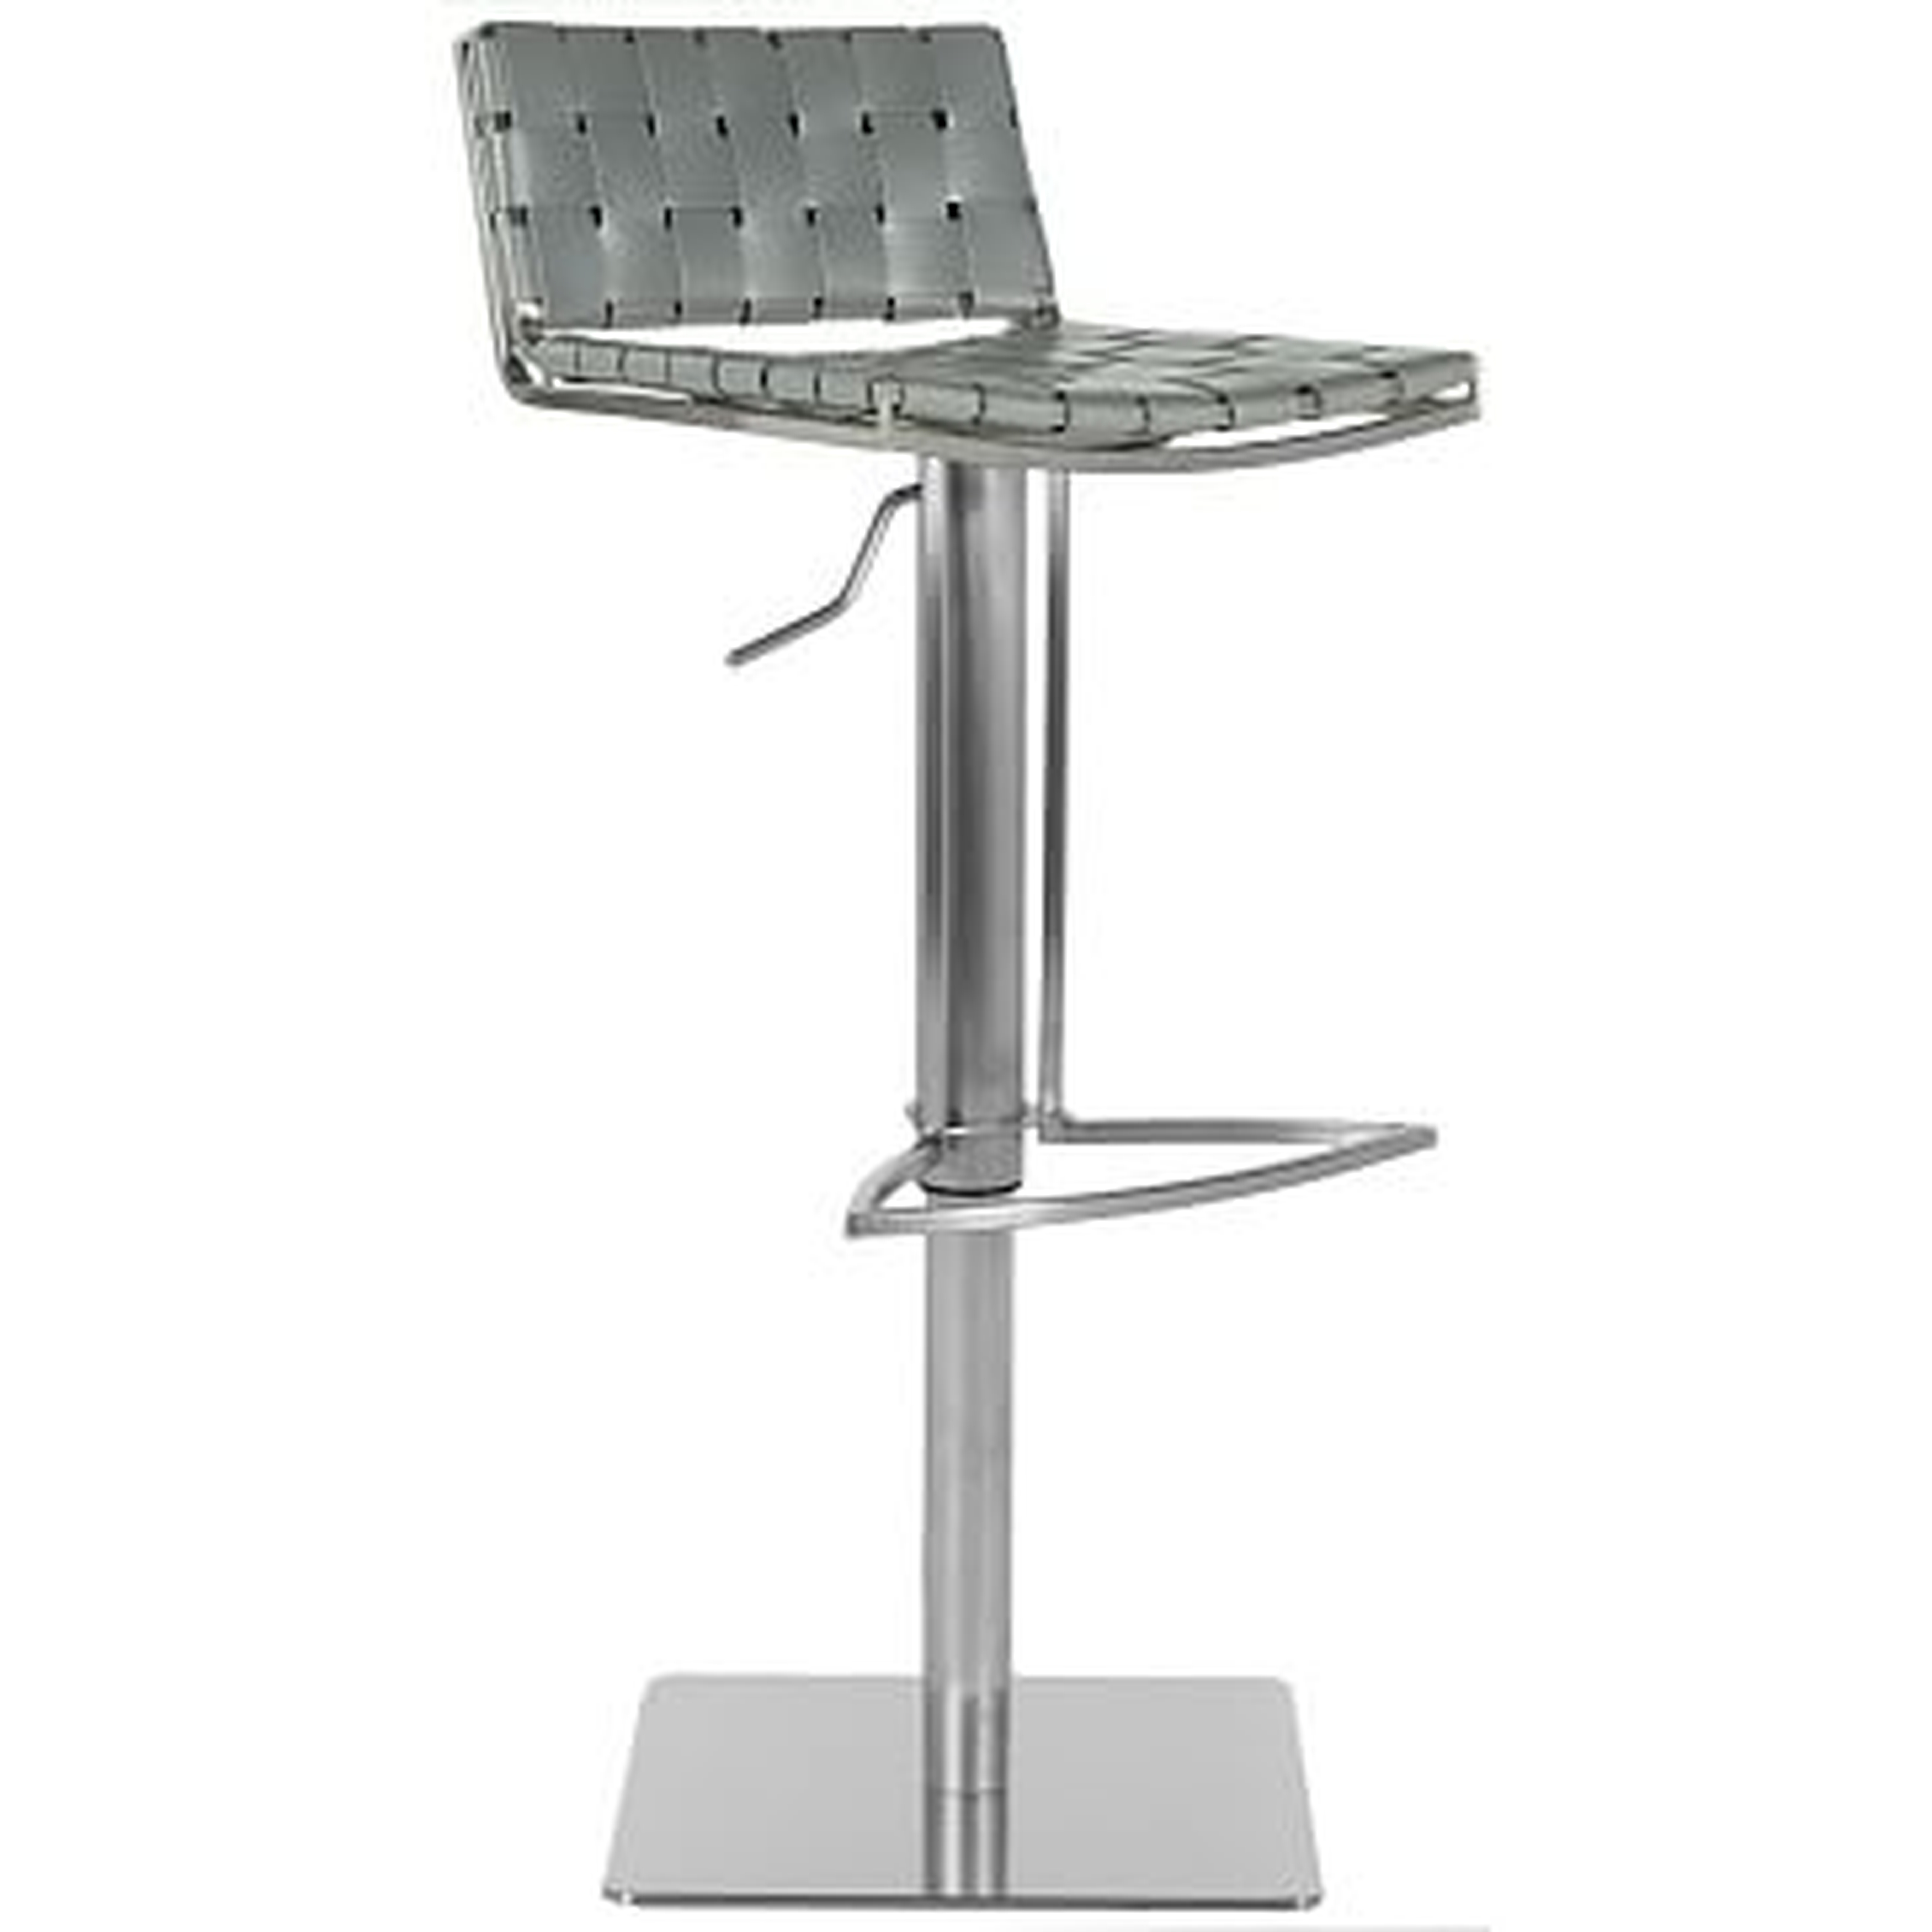 Woven Leather Bar Stool, Leather, Gray, Stainless Steel - West Elm